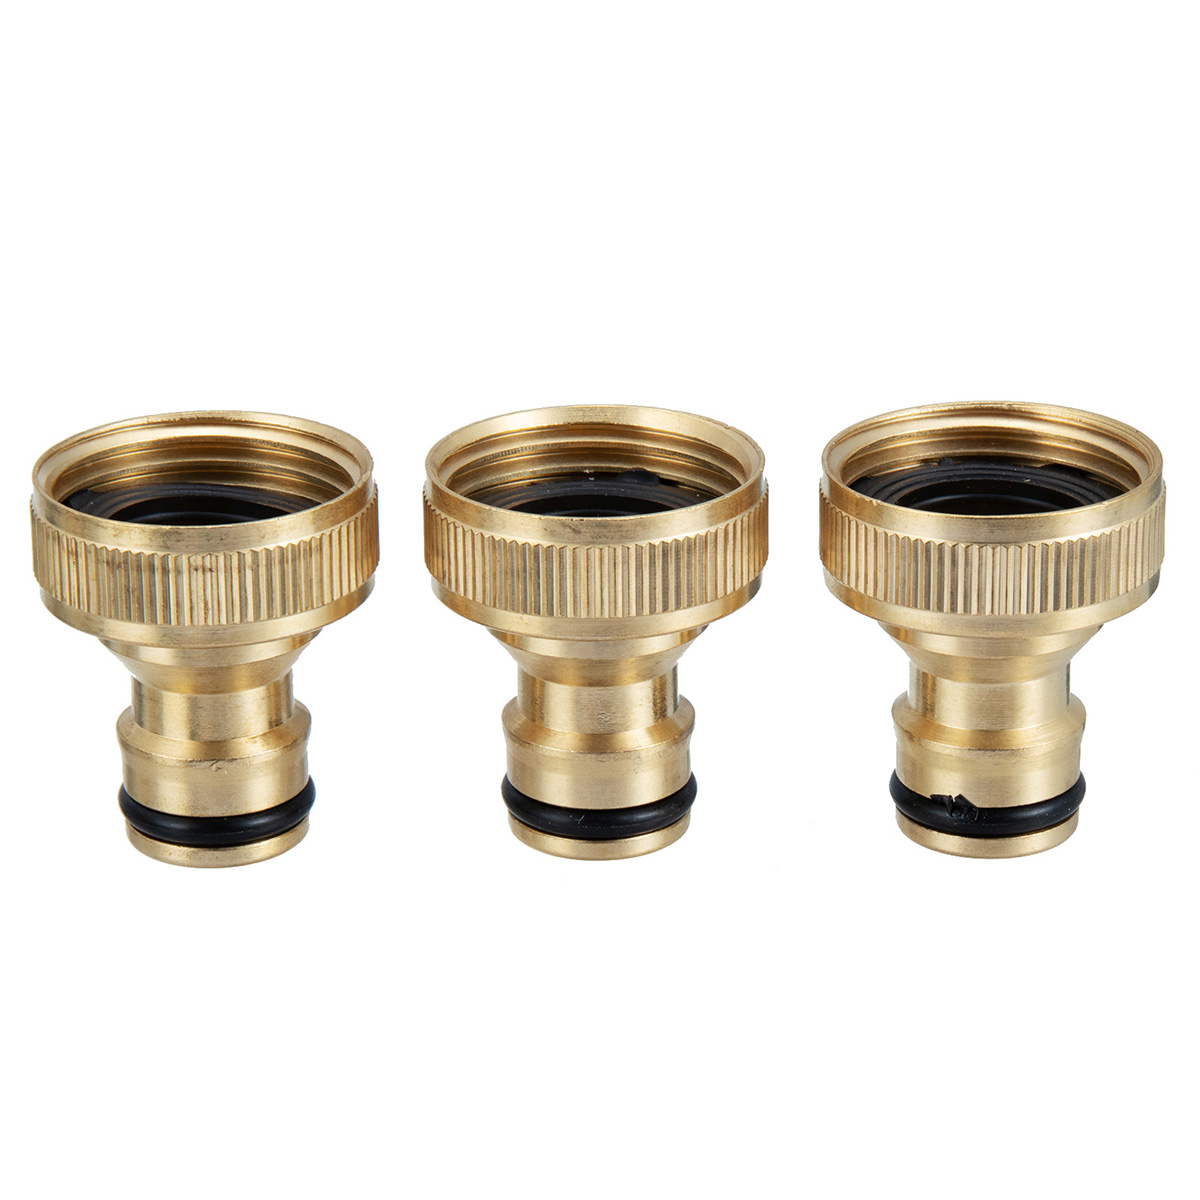 MATCC-Brass-Inner-Teeth-Quick-Connector-Set-34quot-GHT-Brass-Garden-Hose-Quick-Connector-With-Washer-1898352-9